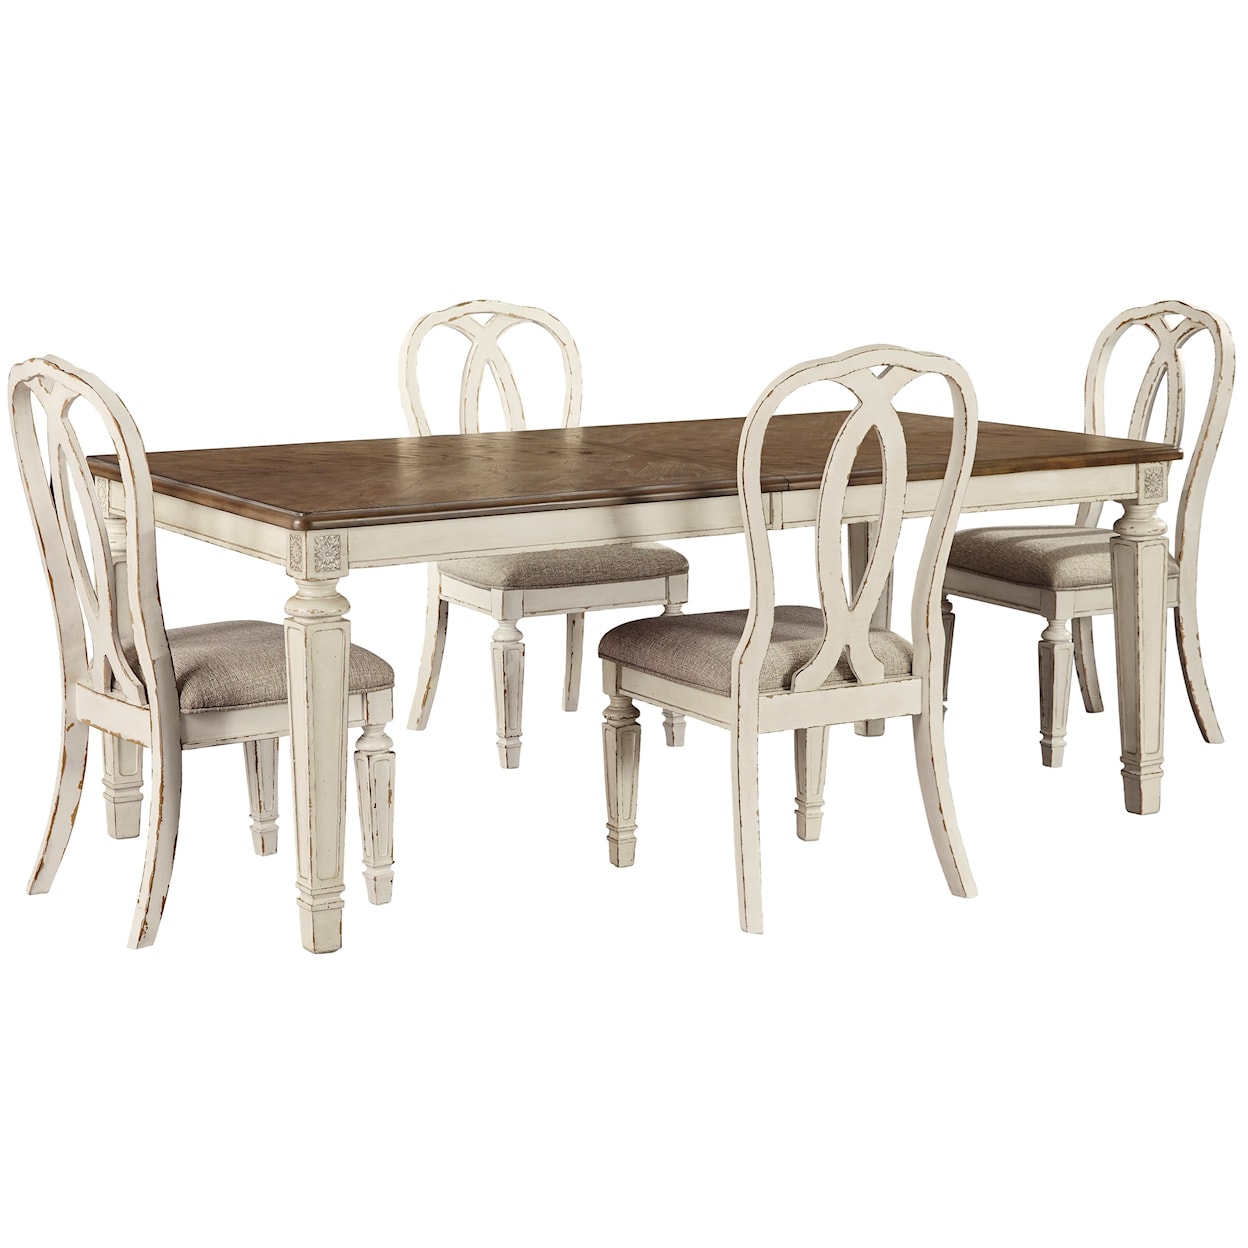 Signature Design by Ashley Furniture Realyn 5-Piece Rectangular Table and Chair Set